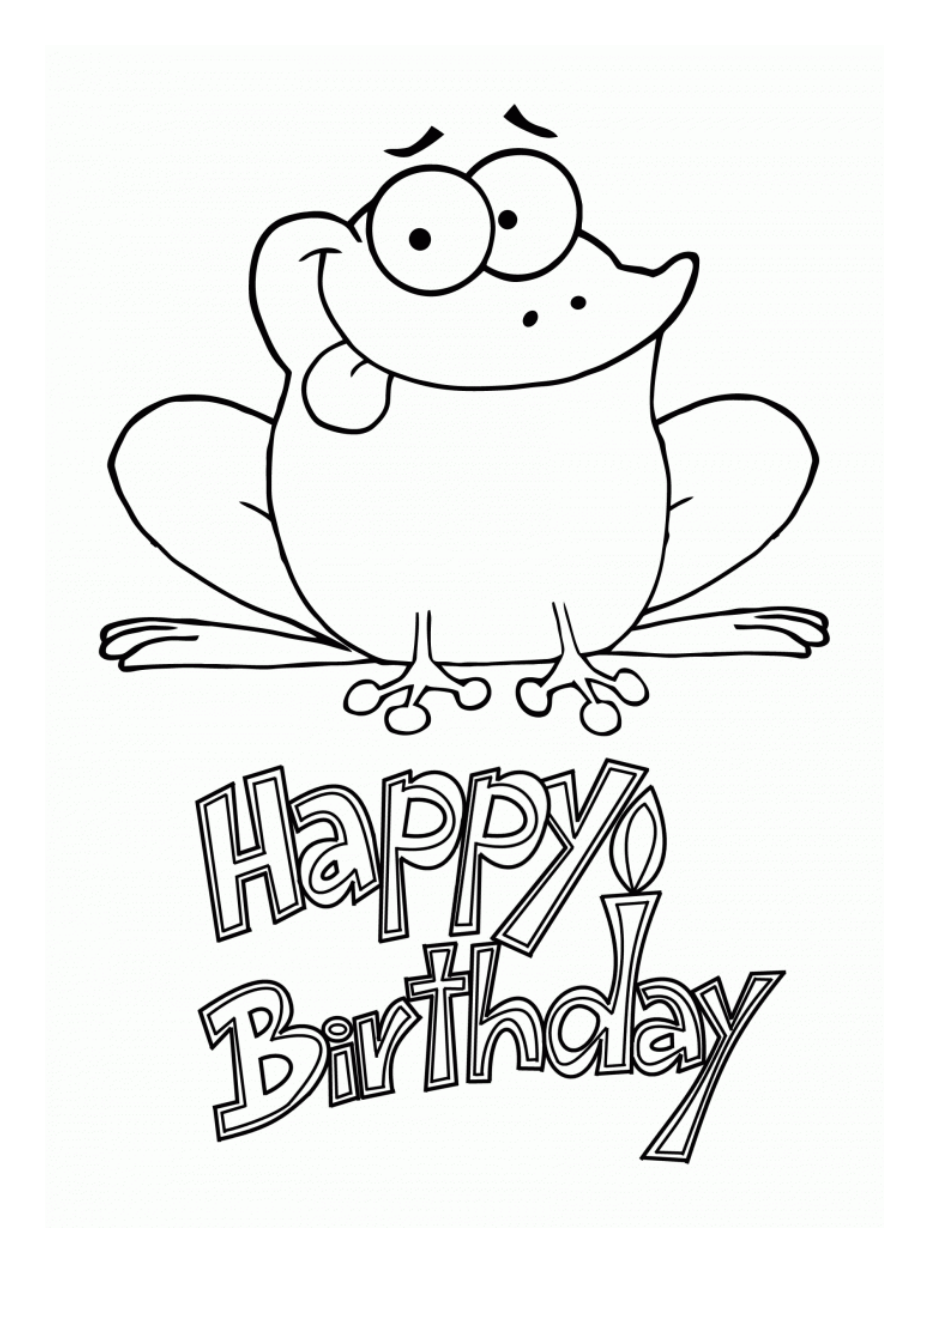 Happy Birthday Coloring Page with a cute frog